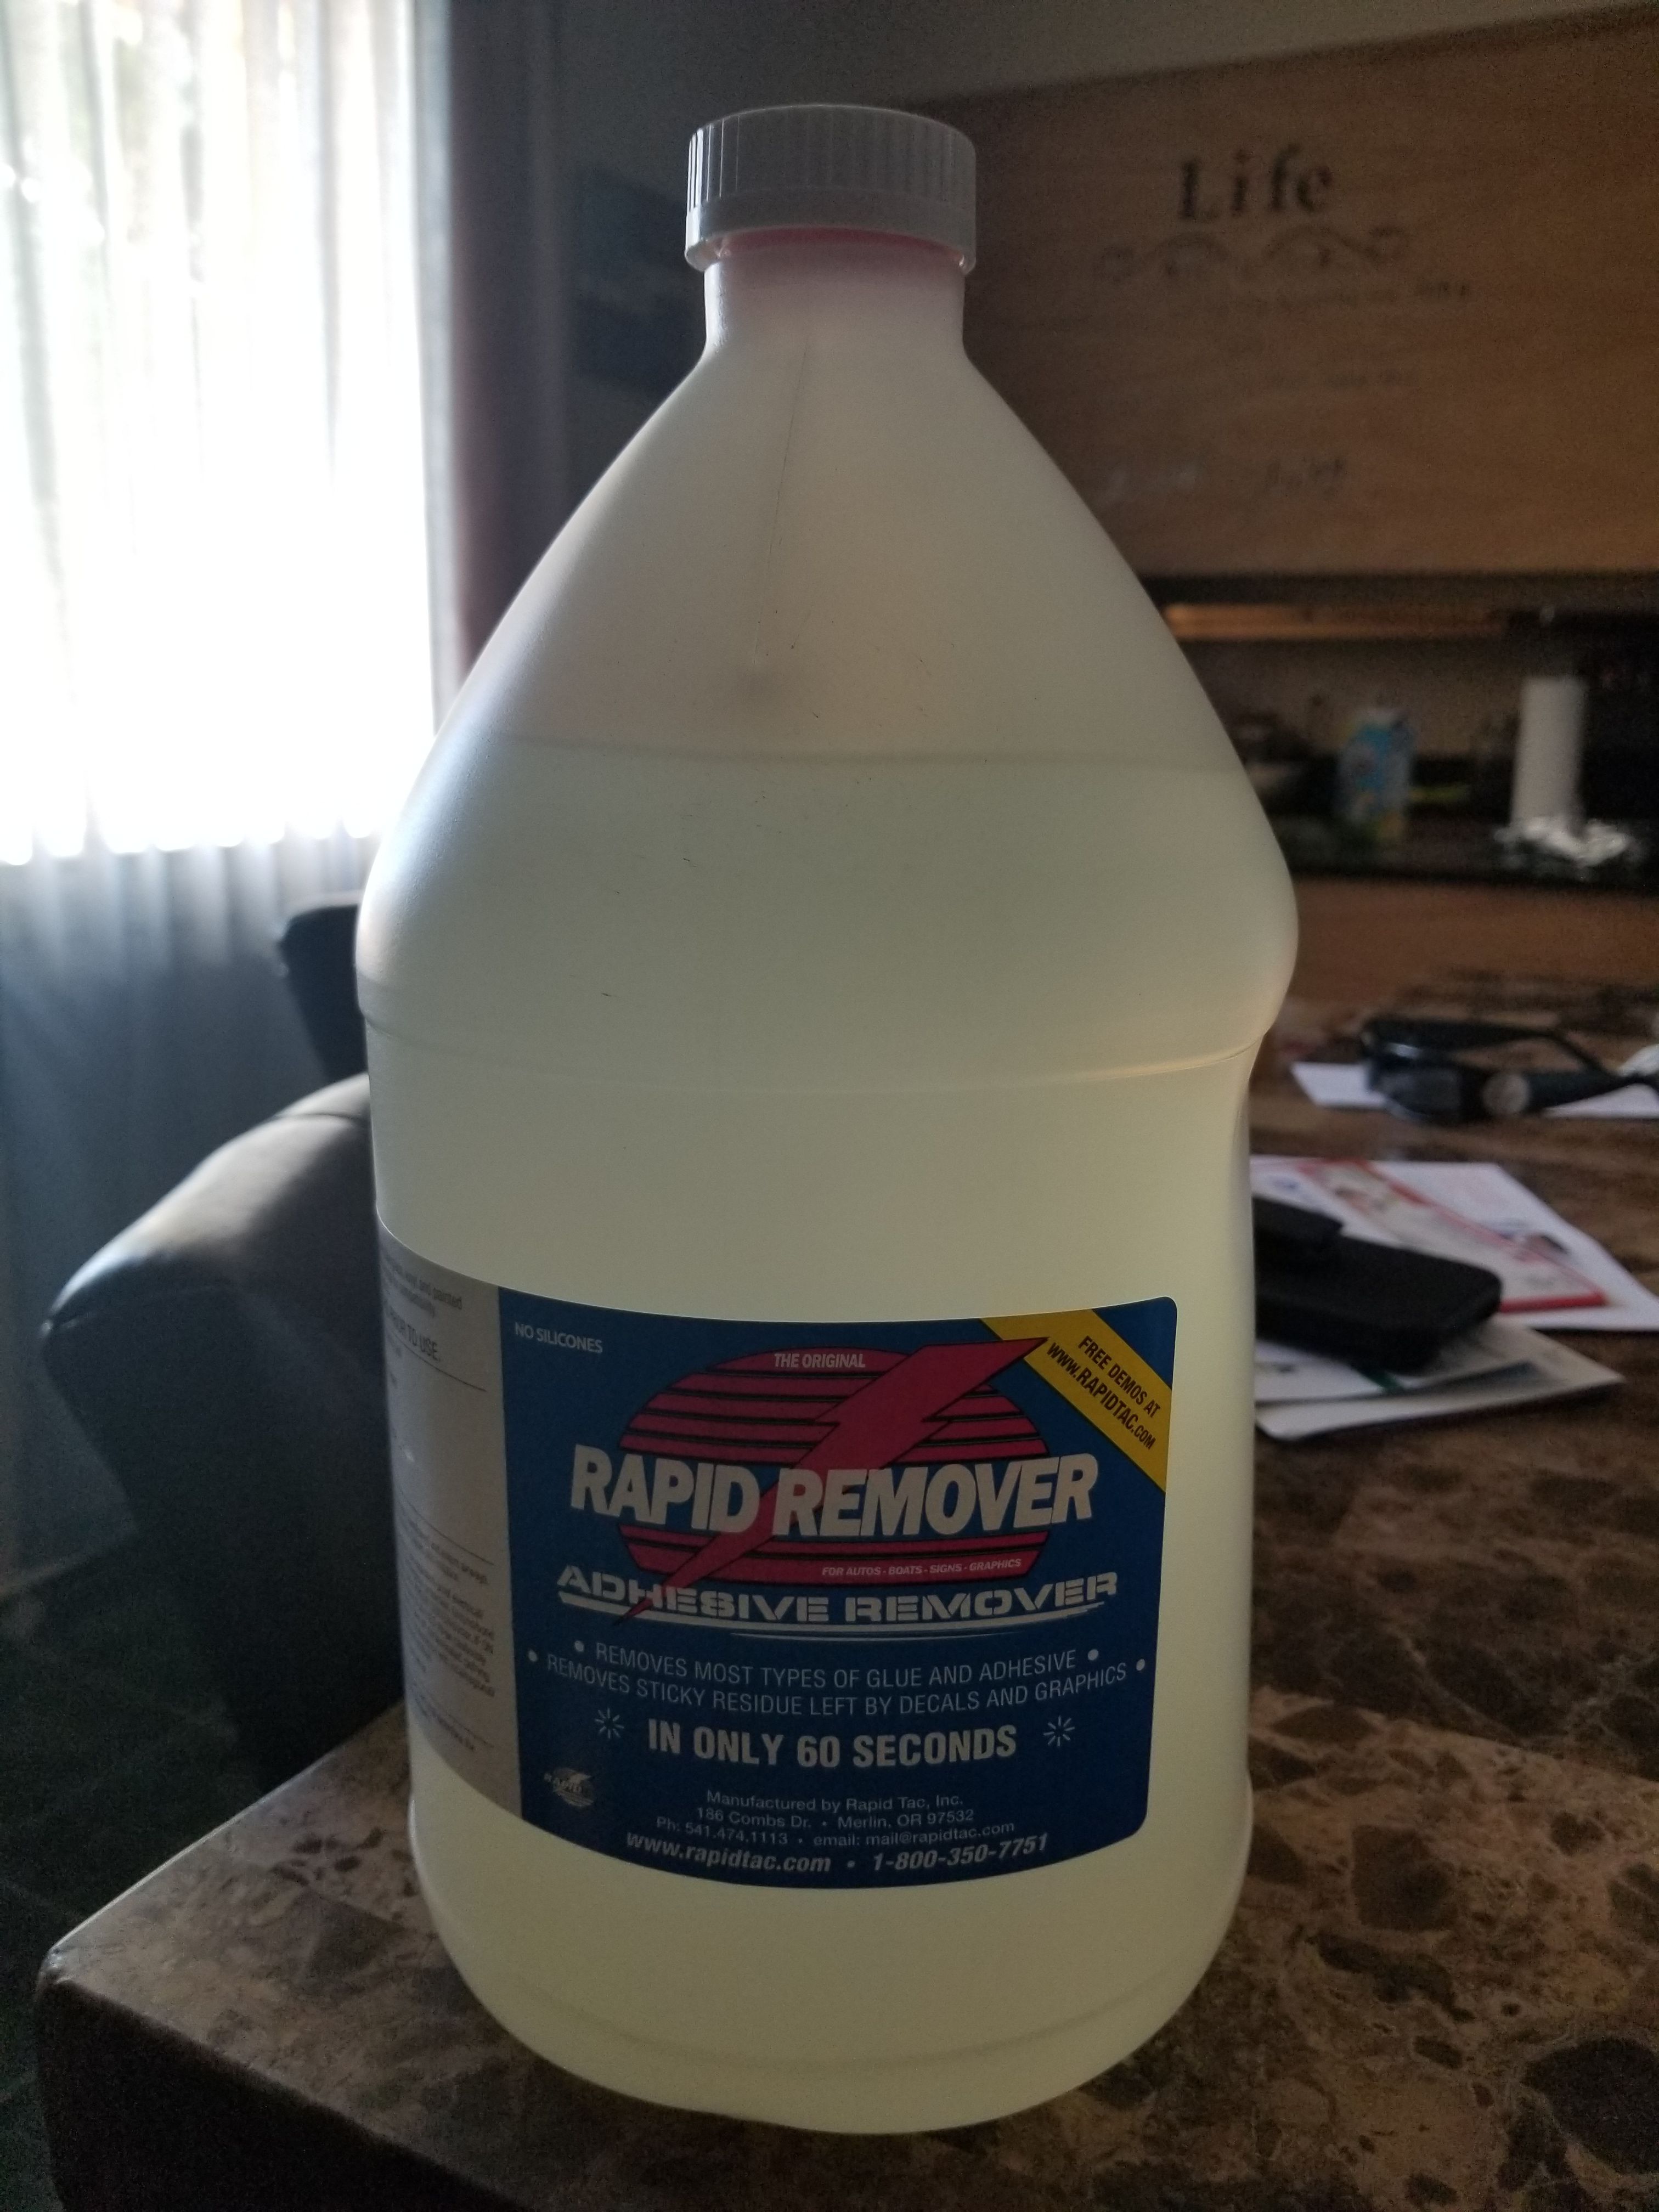 Rapid Tac Rapid Remover adhesive remover for Sale in Phoenix, AZ - OfferUp